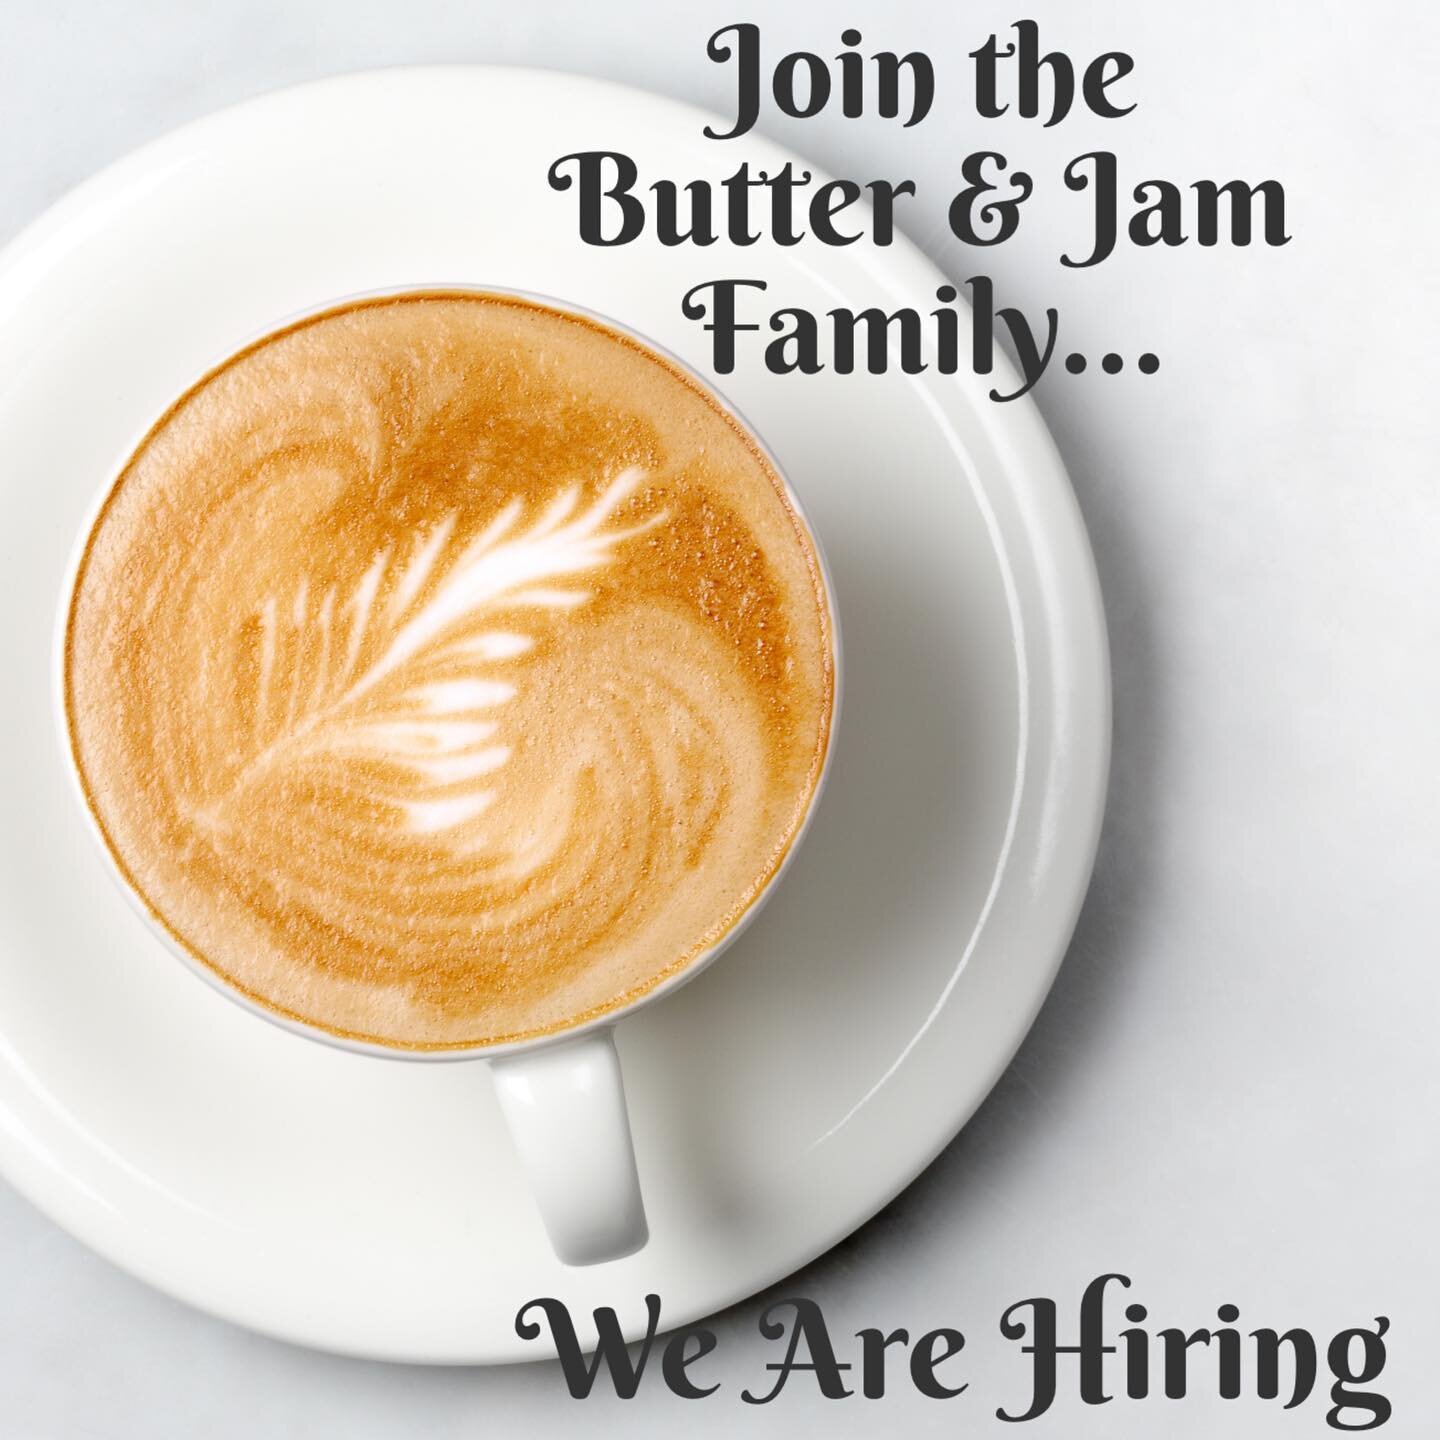 We are looking for experienced Baristas, servers and hostesses to join our team! Willing to train eager individuals who want to learn more about the restaurant industry. 
DM us or email:
Info@butterandjam.com